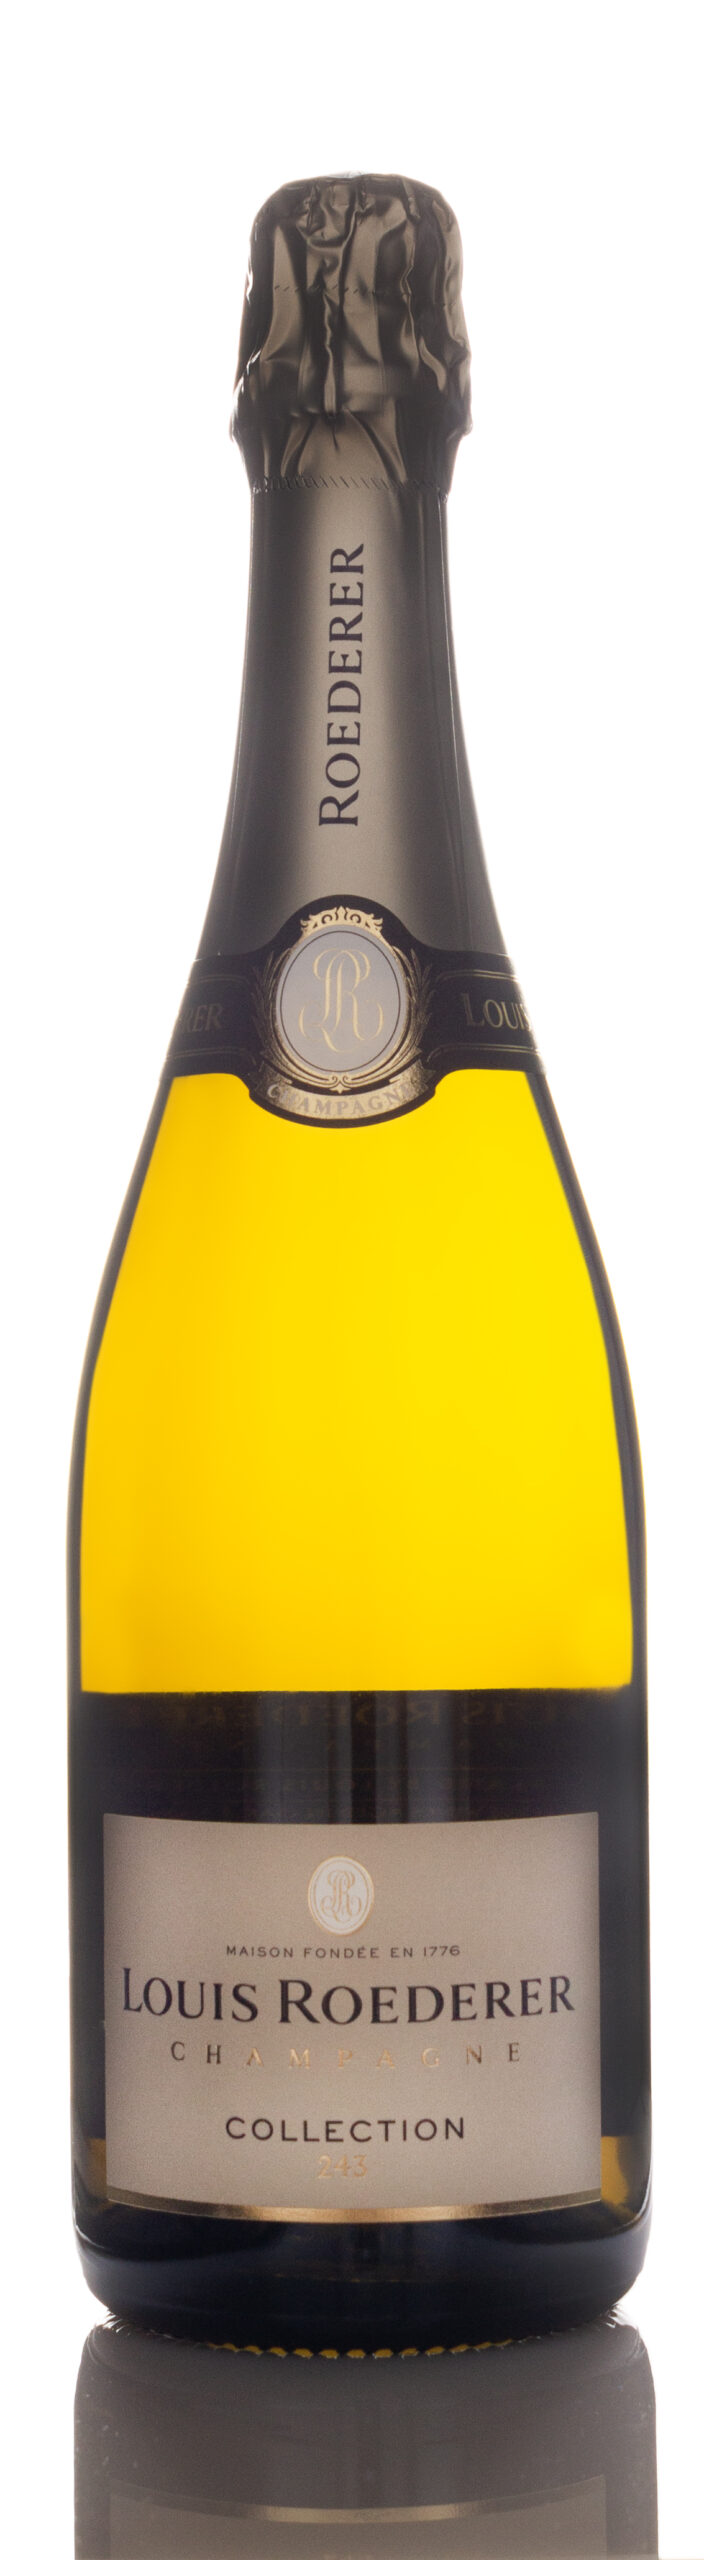 Louis Roederer Collection Brut, Champagne